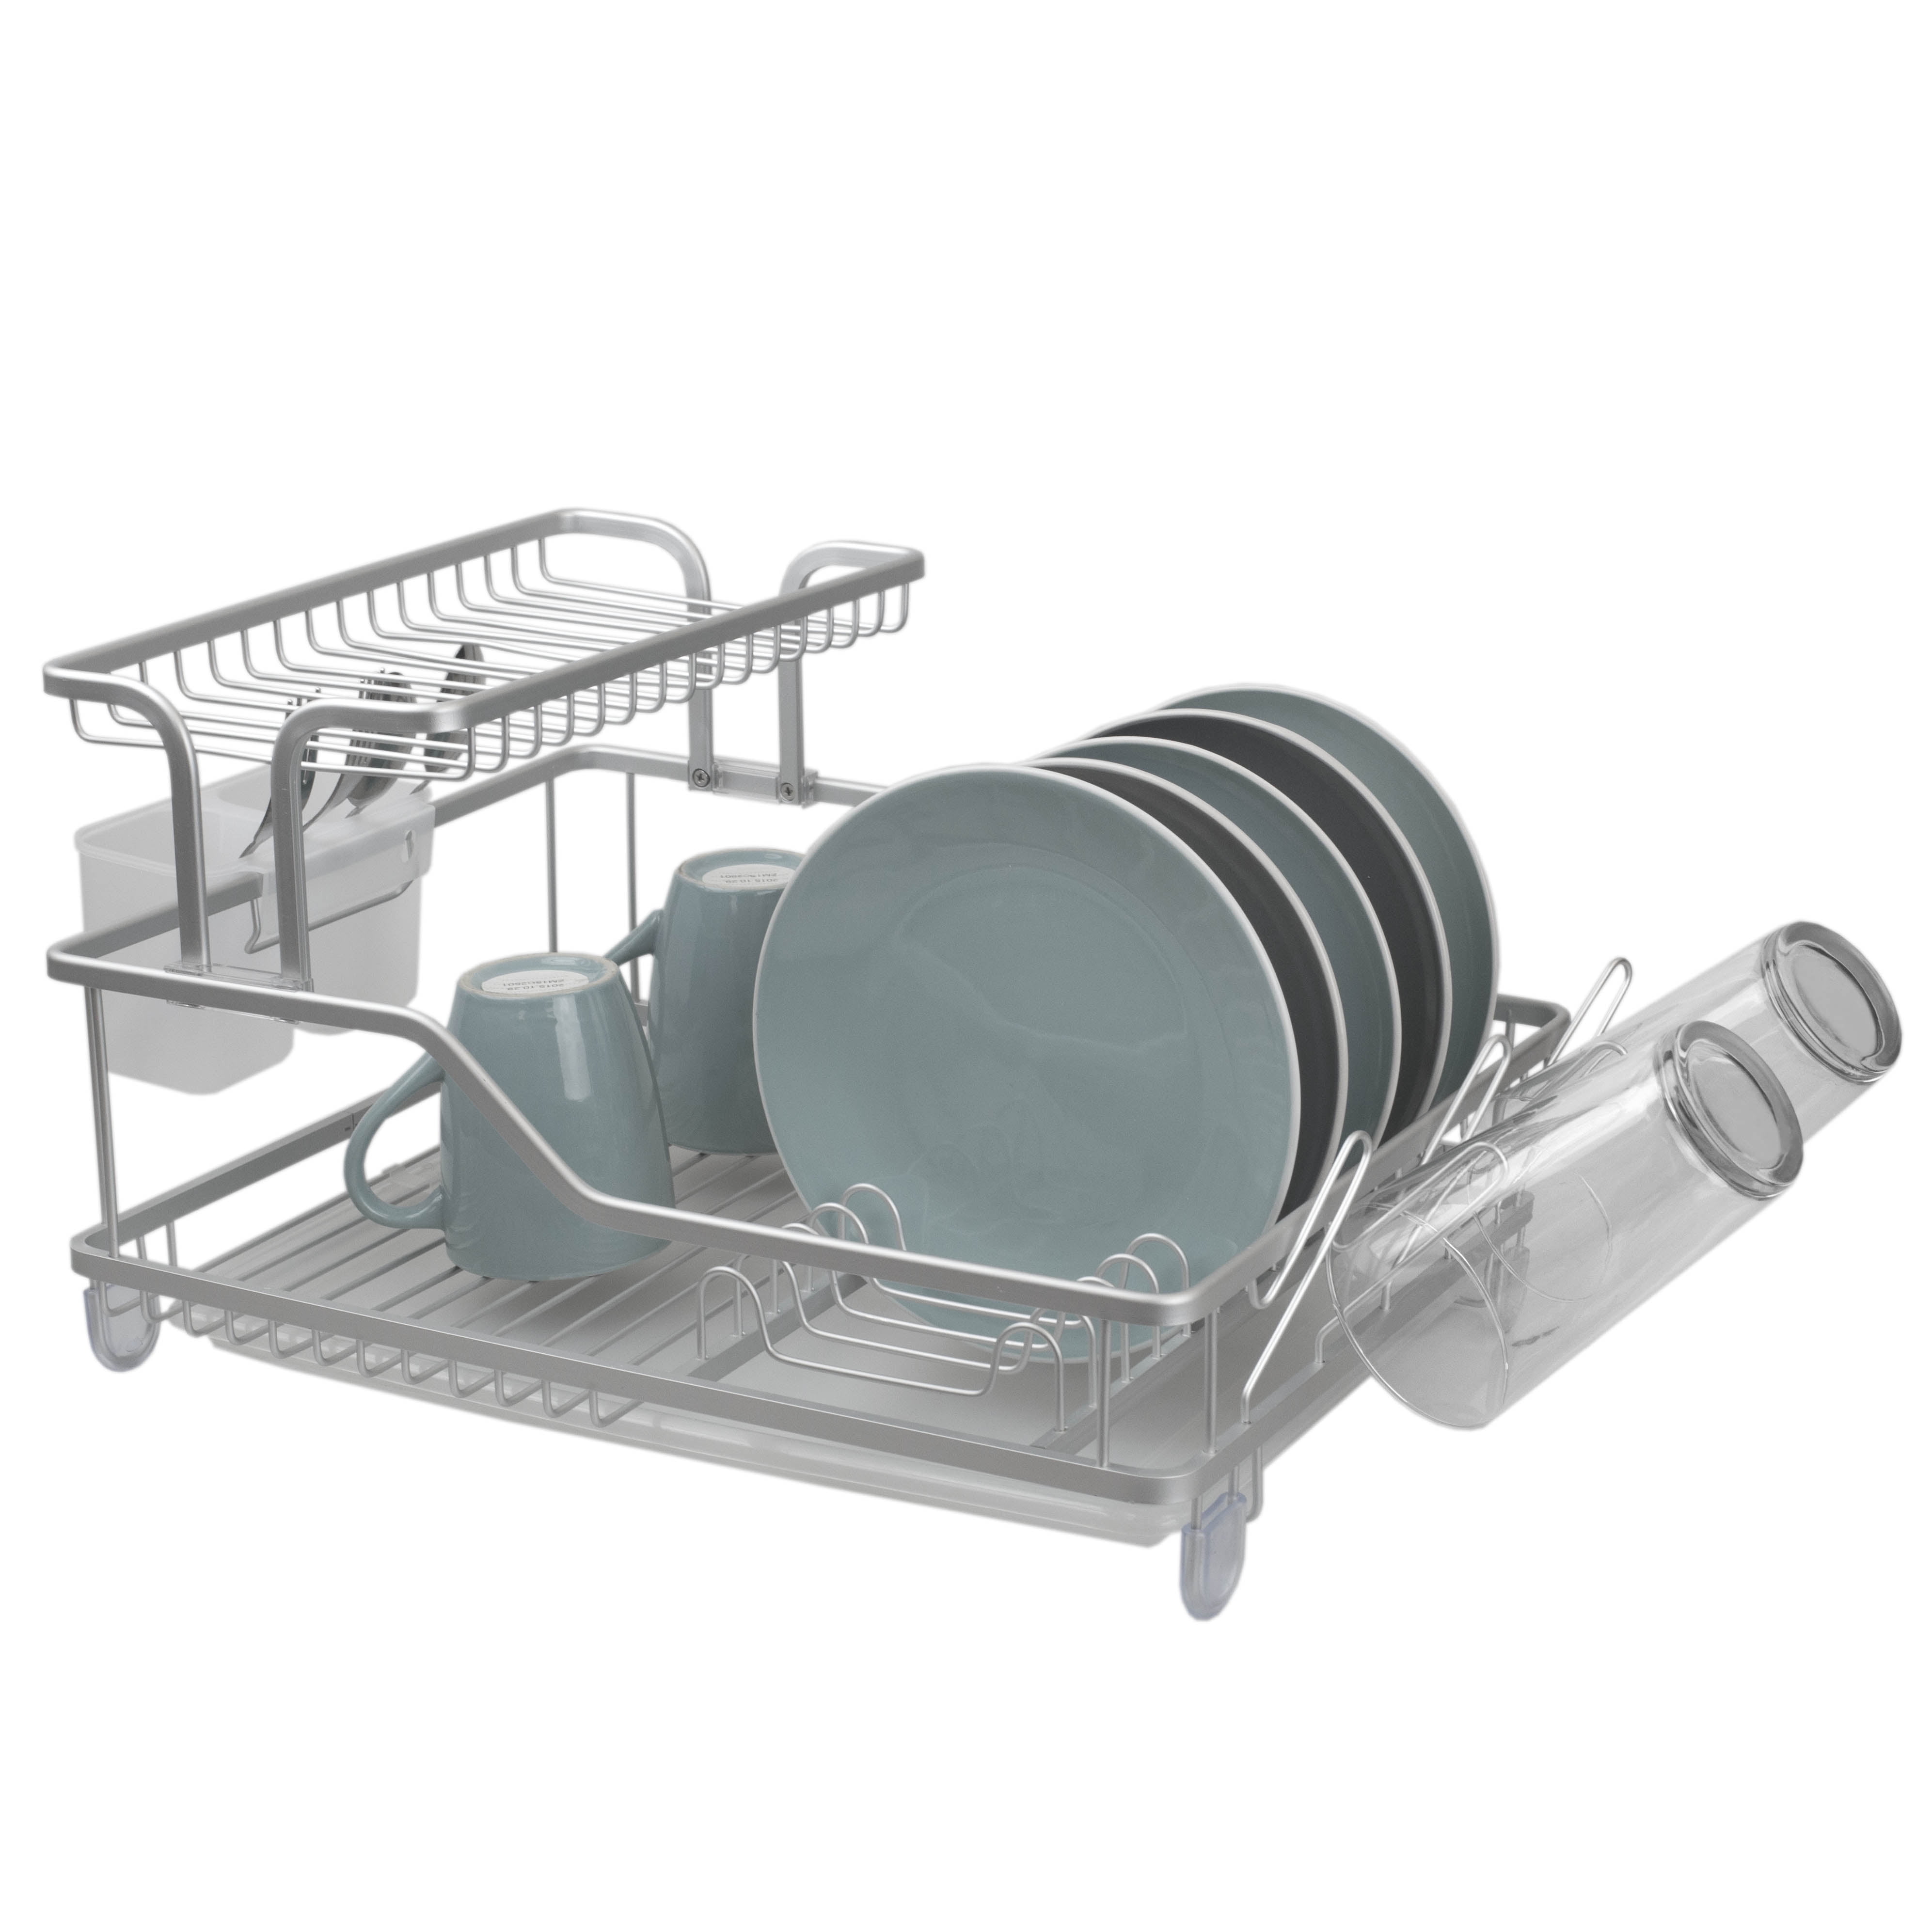 Michael Graves Design Deluxe Dish Rack with Satin Nickel Finish and  Removable Utensil Holder, Grey/Silver, KITCHEN ORGANIZATION